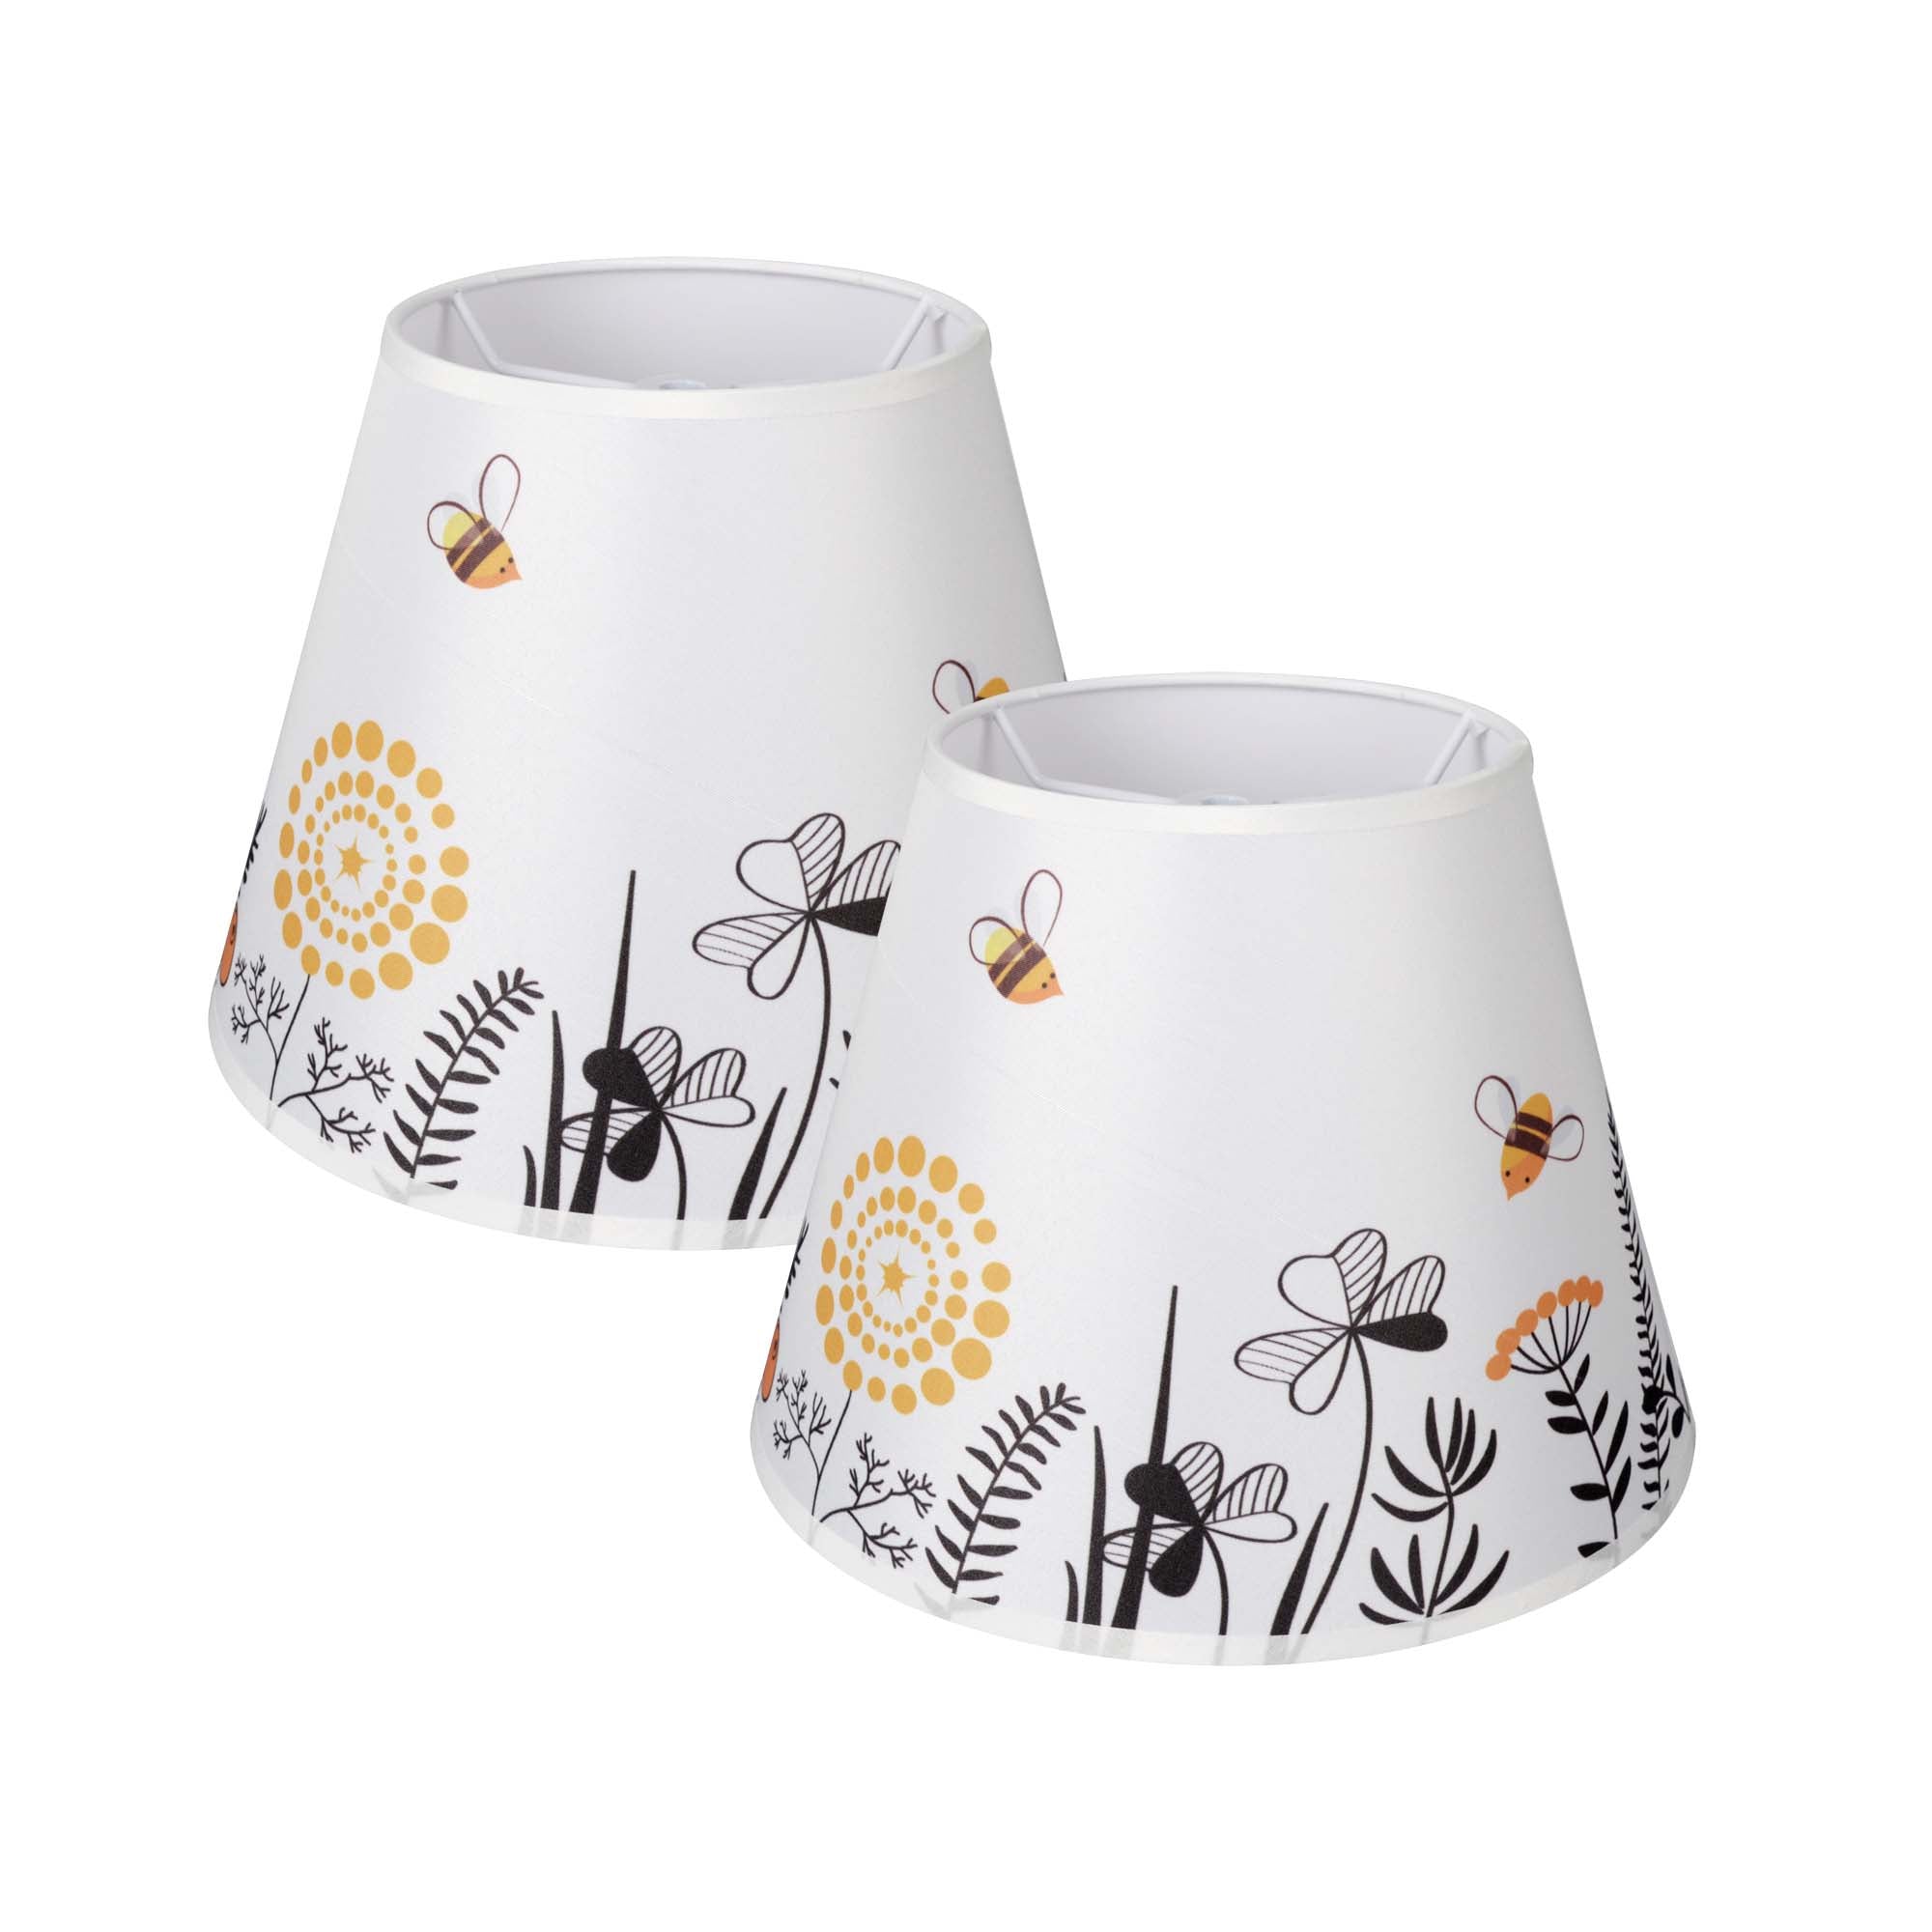 Carro Home Nature Collection Limited Edition Round Empire Shape Lamp Shade 6"x10"x7.5" – Bumble Bee (Set of 2)